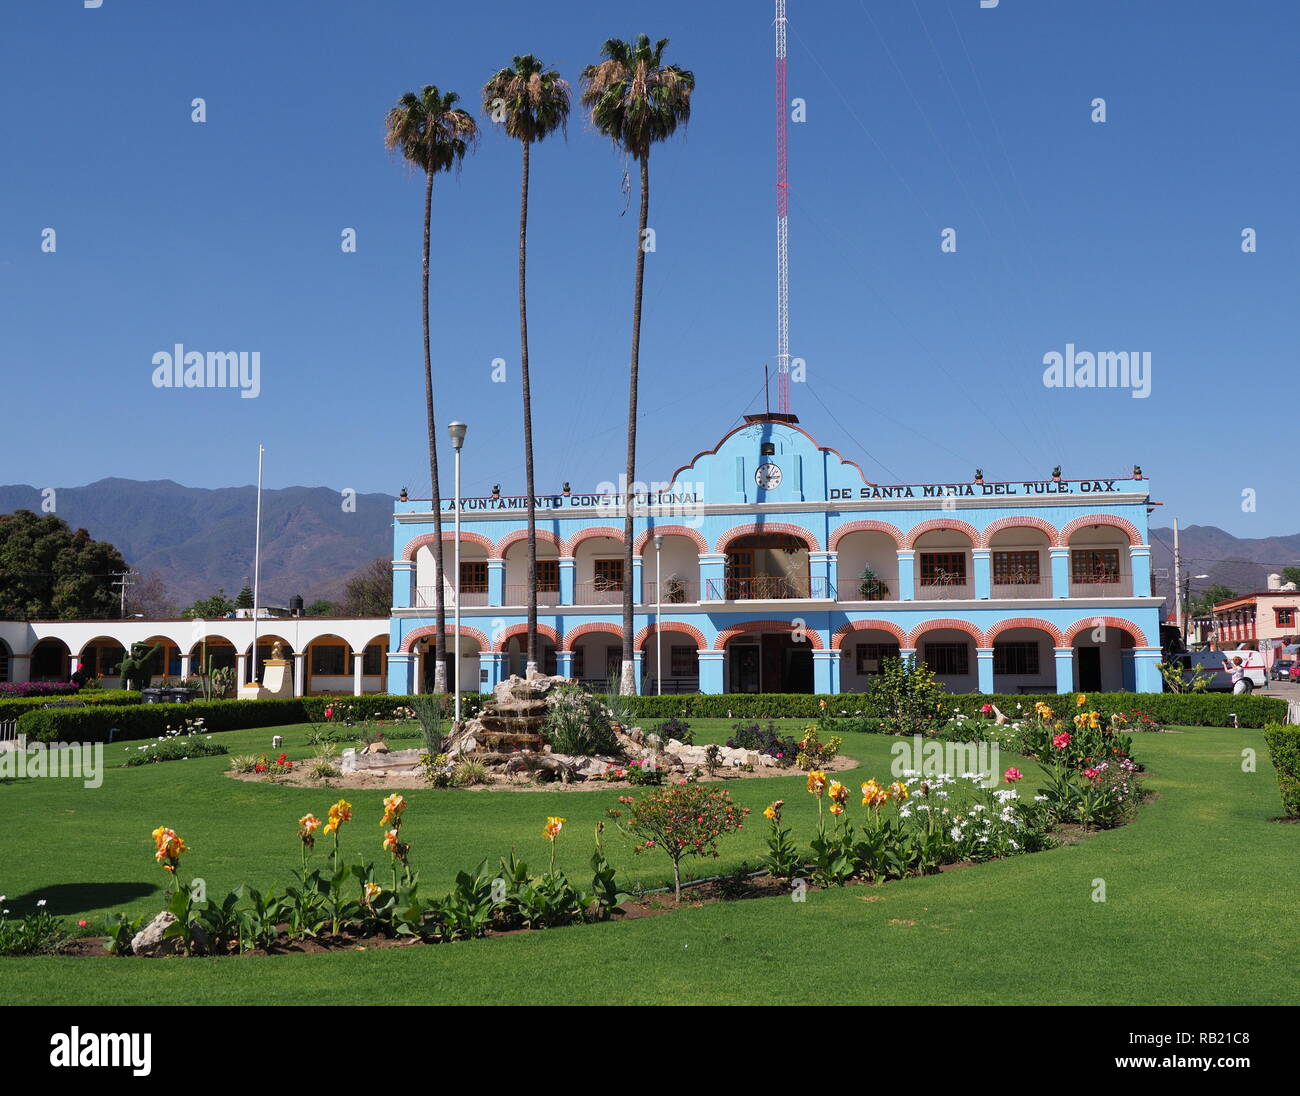 Beauty plants on main square in front of town hall in Santa Maria del Tule city center at Oaxaca state in Mexico Stock Photo